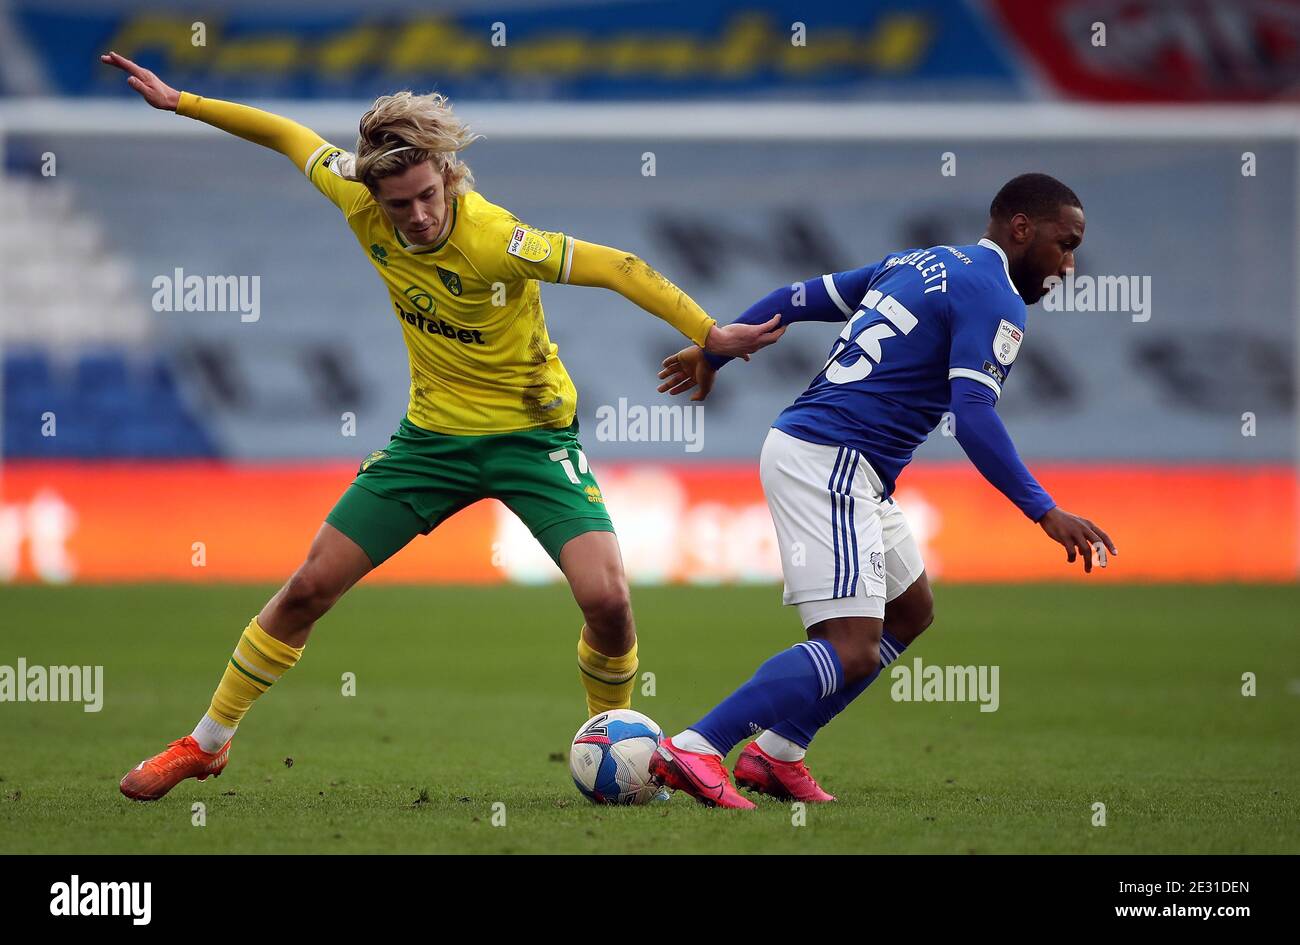 Norwich City's Todd Cantwell (left) and Cardiff City's Junior Hoilett battle for the ball during the Sky Bet Championship match at the Cardiff City Stadium, Cardiff. Stock Photo